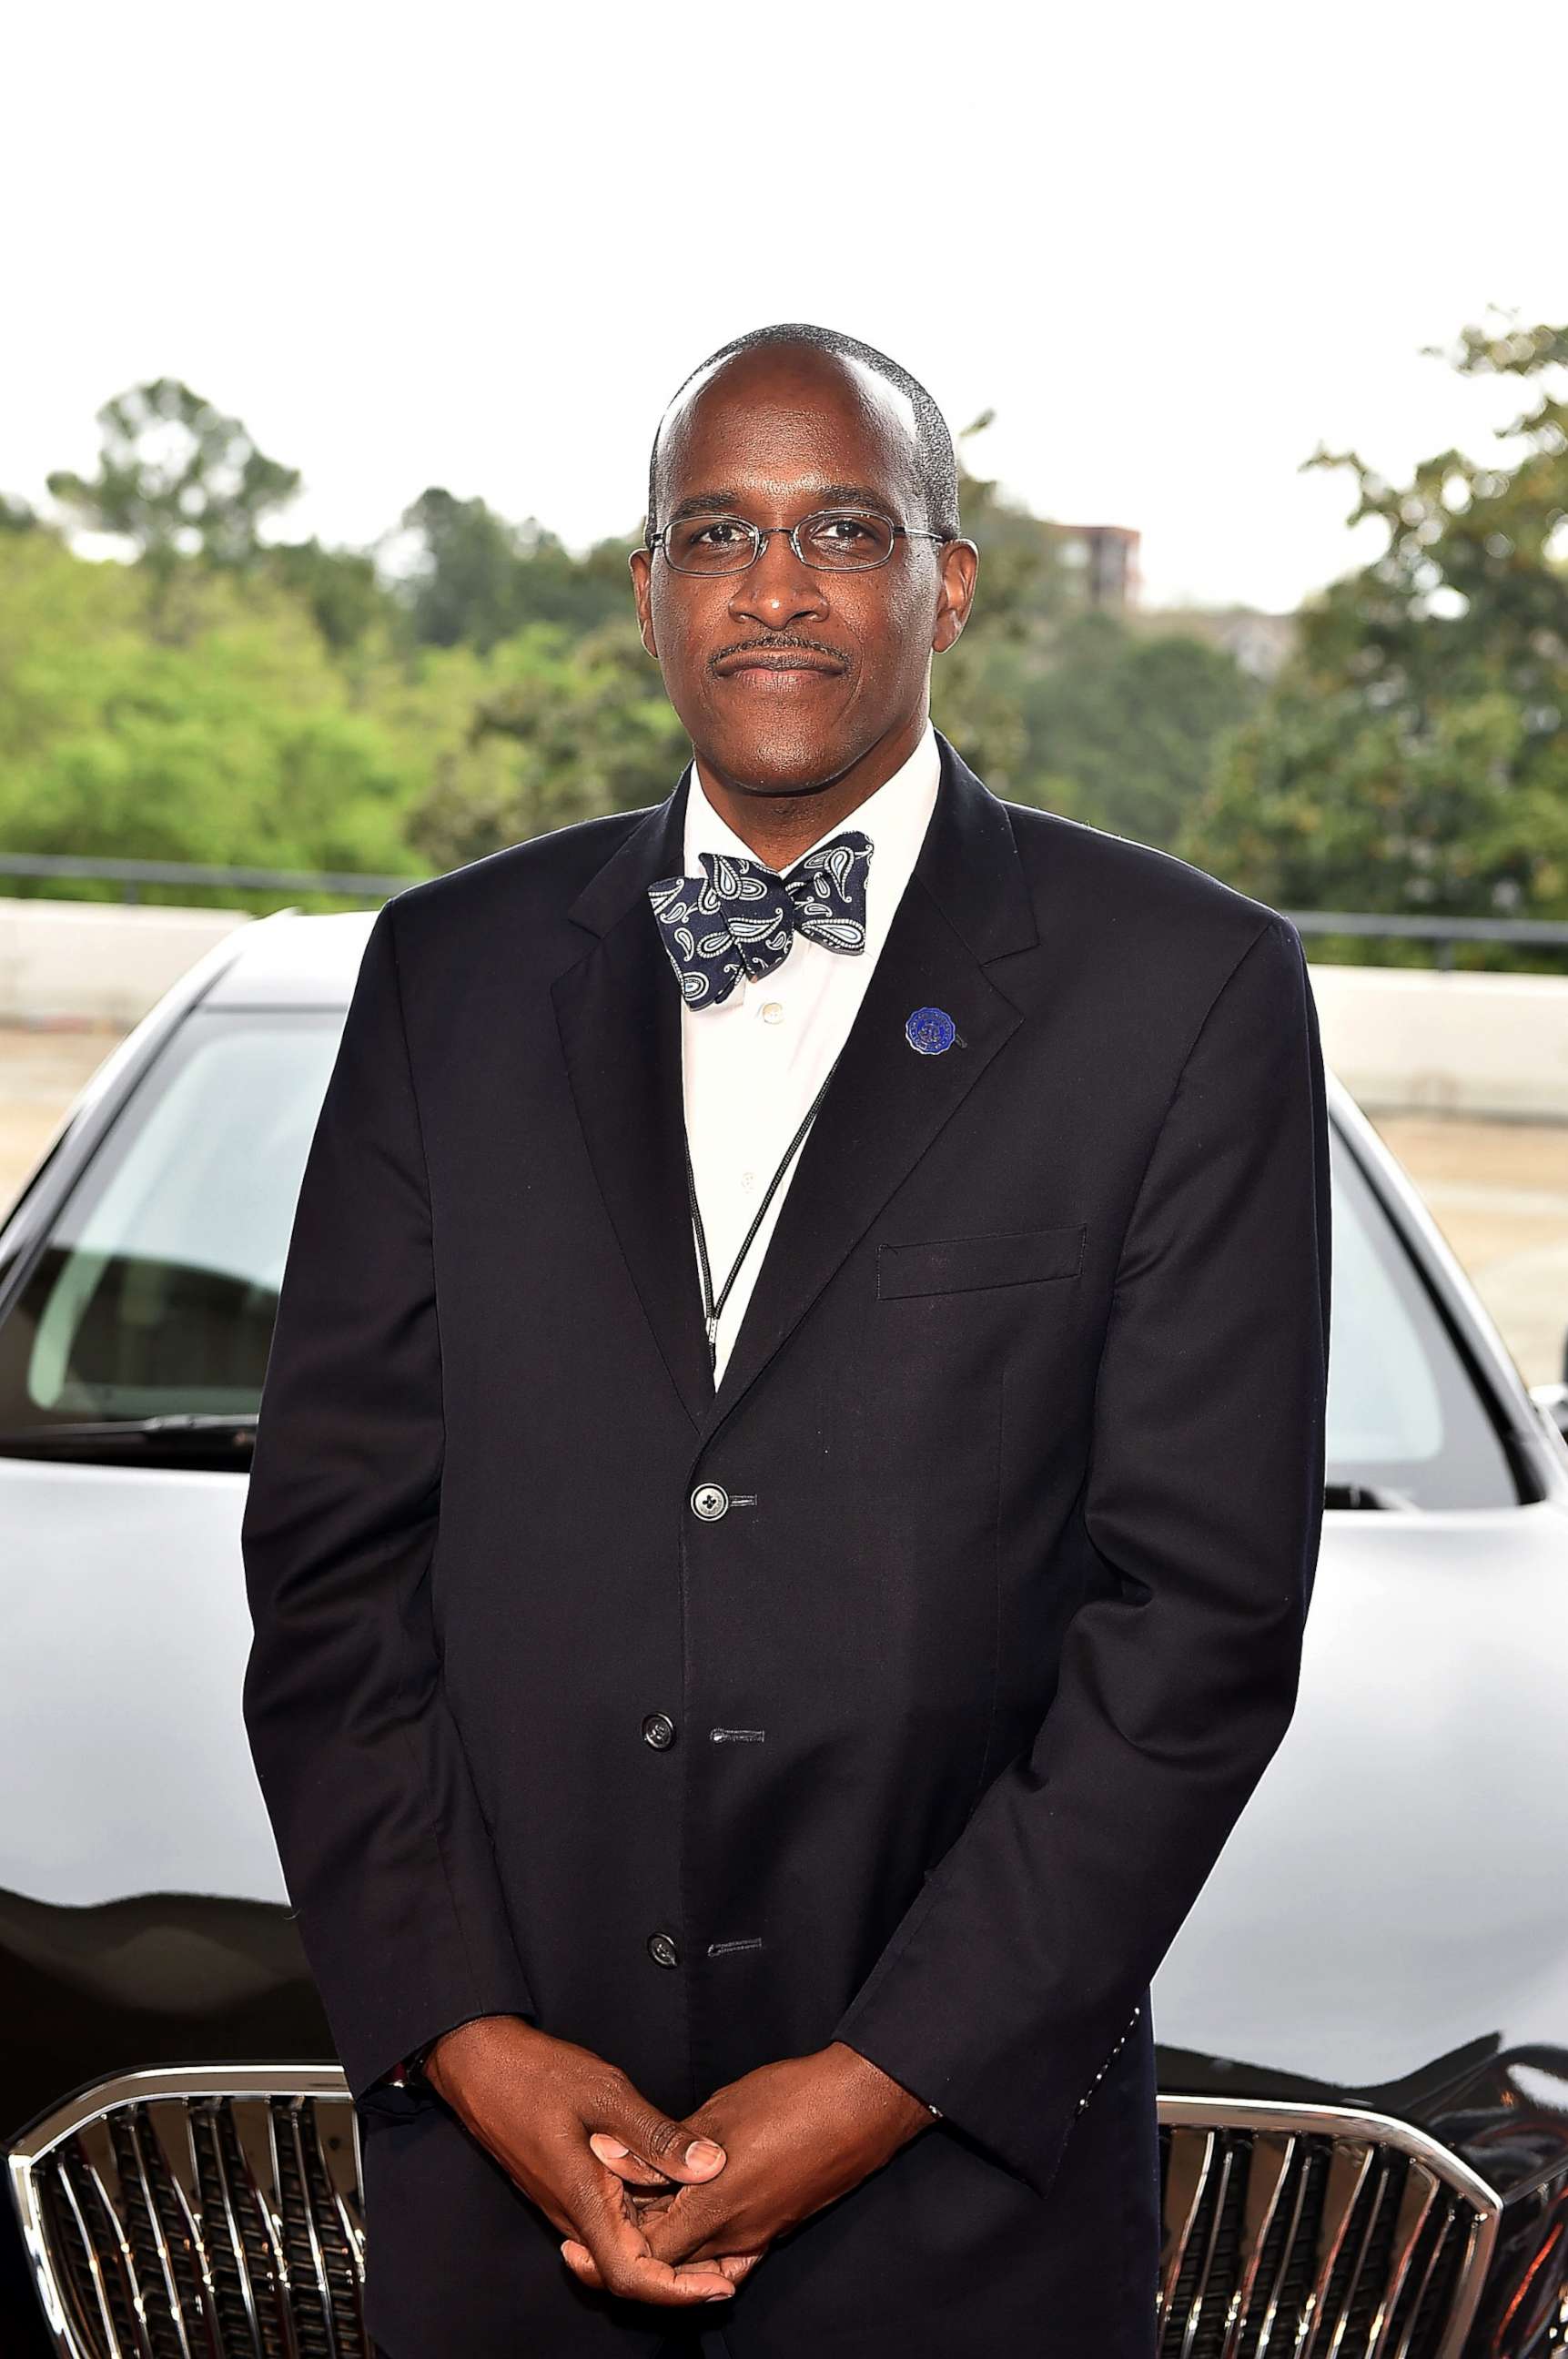 PHOTO: Dr. Walter M. Kimbrough attends the UNCF 'An Evening Of Stars' at Boisfeuillet Jones Atlanta Civic Center, April 12, 2015, in Atlanta.